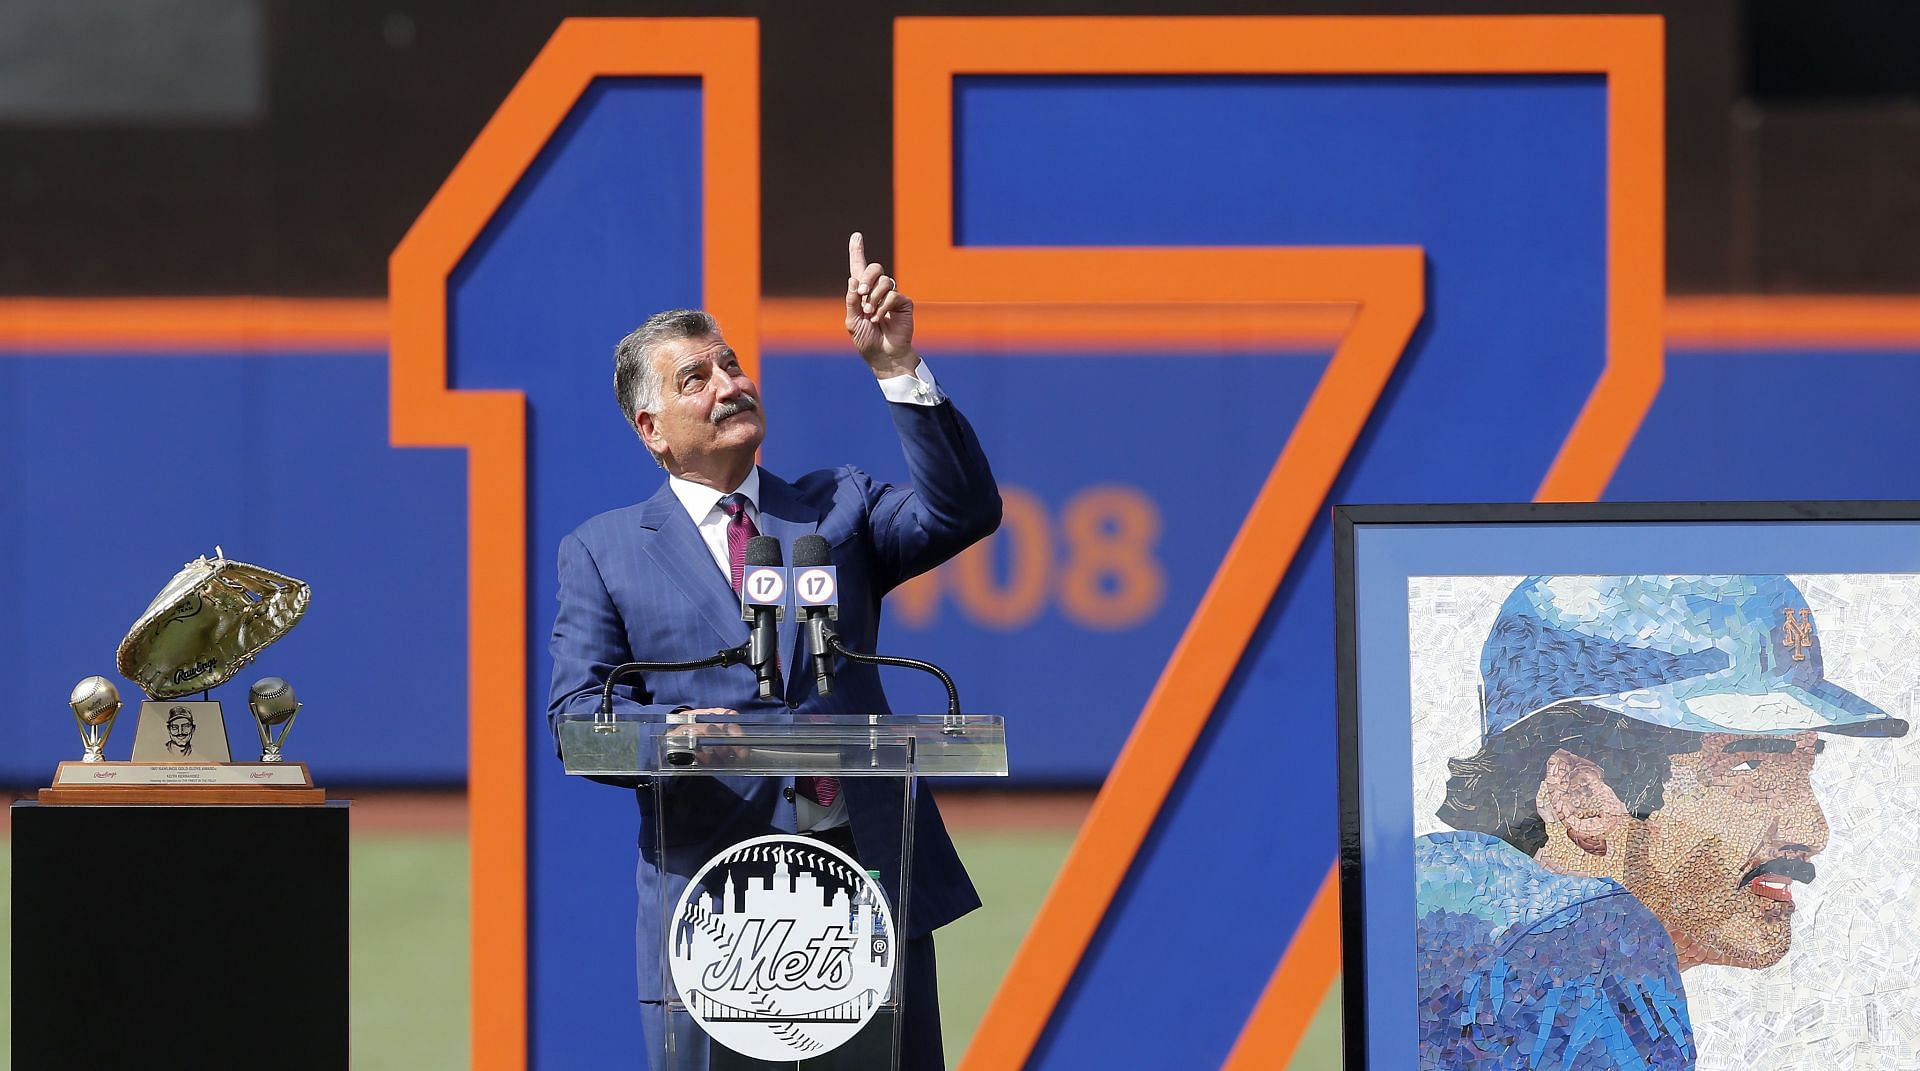 Miami Marlins v New York Mets: NEW YORK, NEW YORK - JULY 09: Former New York Met Keith Hernandez speaks during his jersey retirement ceremony prior to a game against the Miami Marlins at Citi Field on July 09, 2022, in New York City. (Photo by Jim McIsaac/Getty Images)